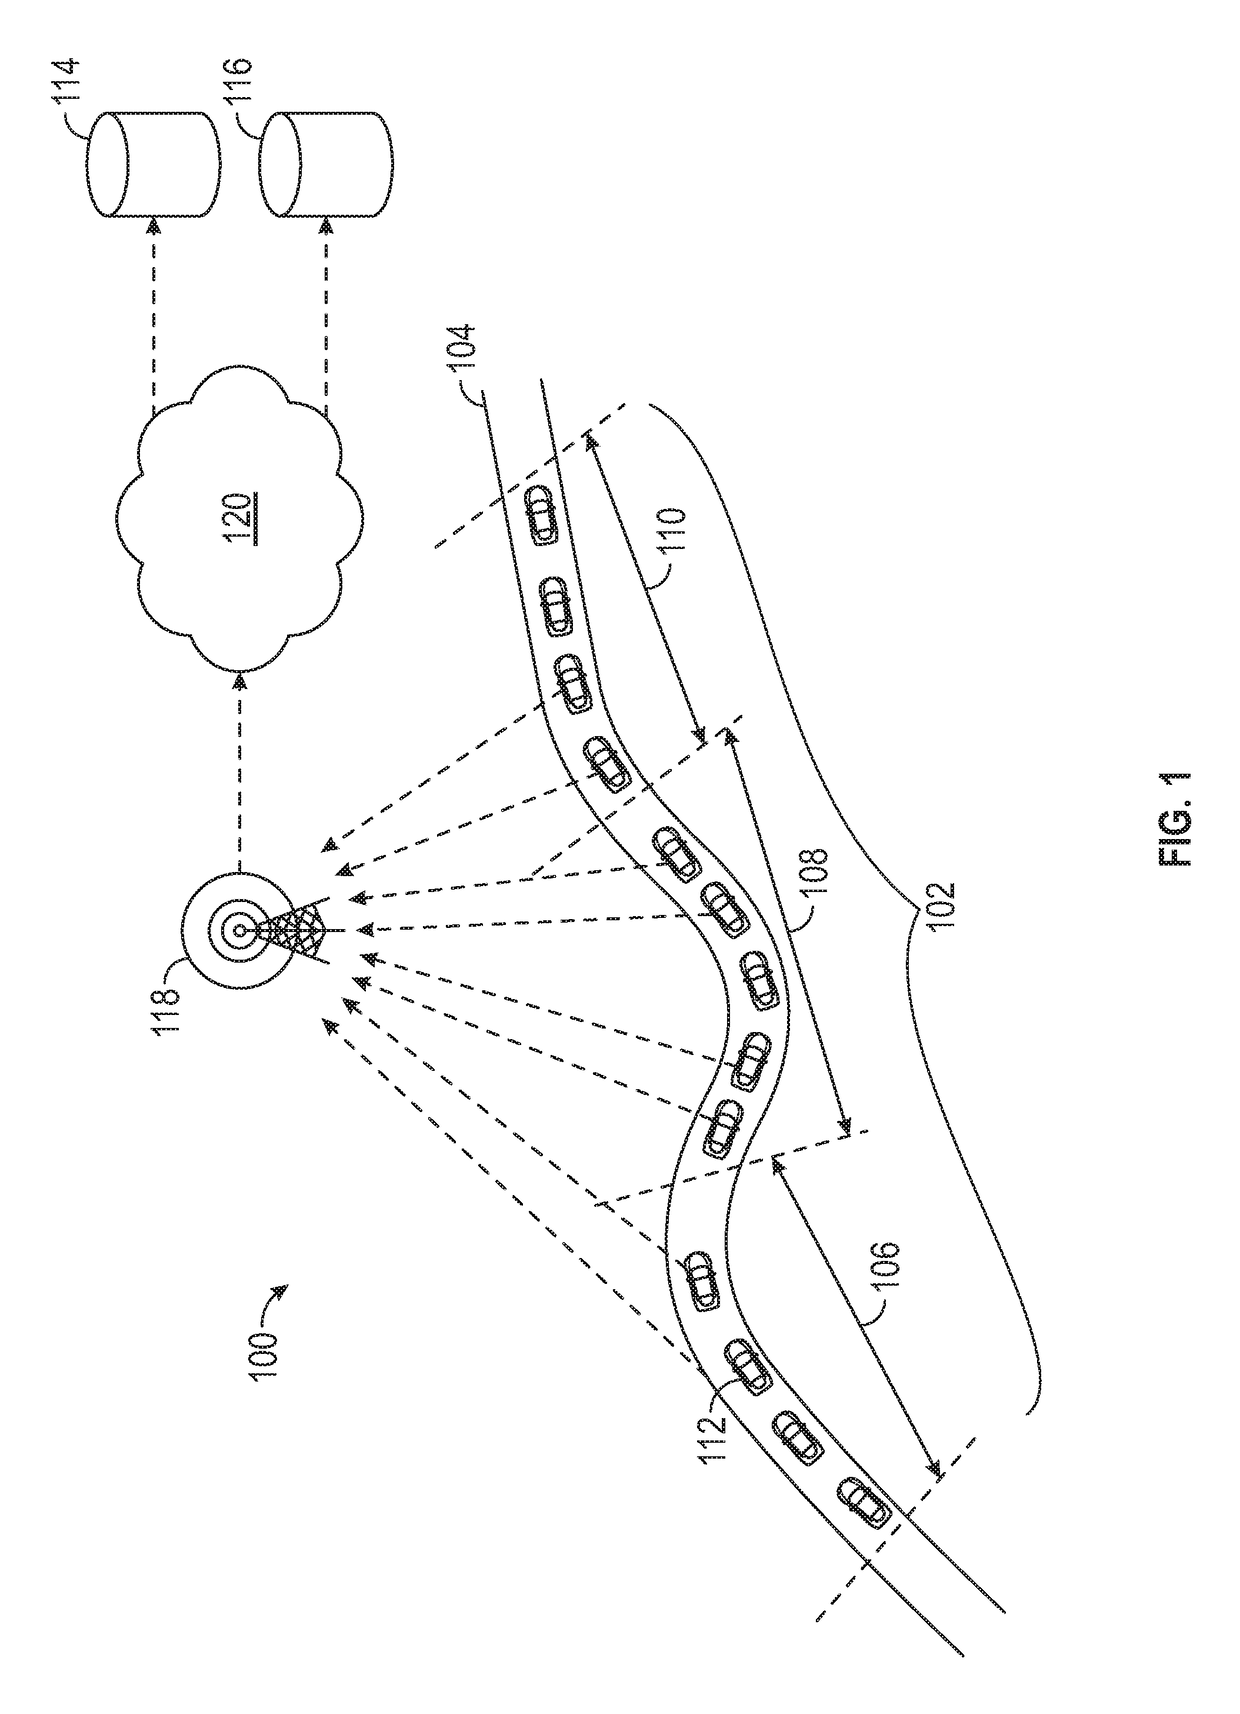 Method and apparatus for detecting road condition data and weather condition data using vehicular crowd-sensing